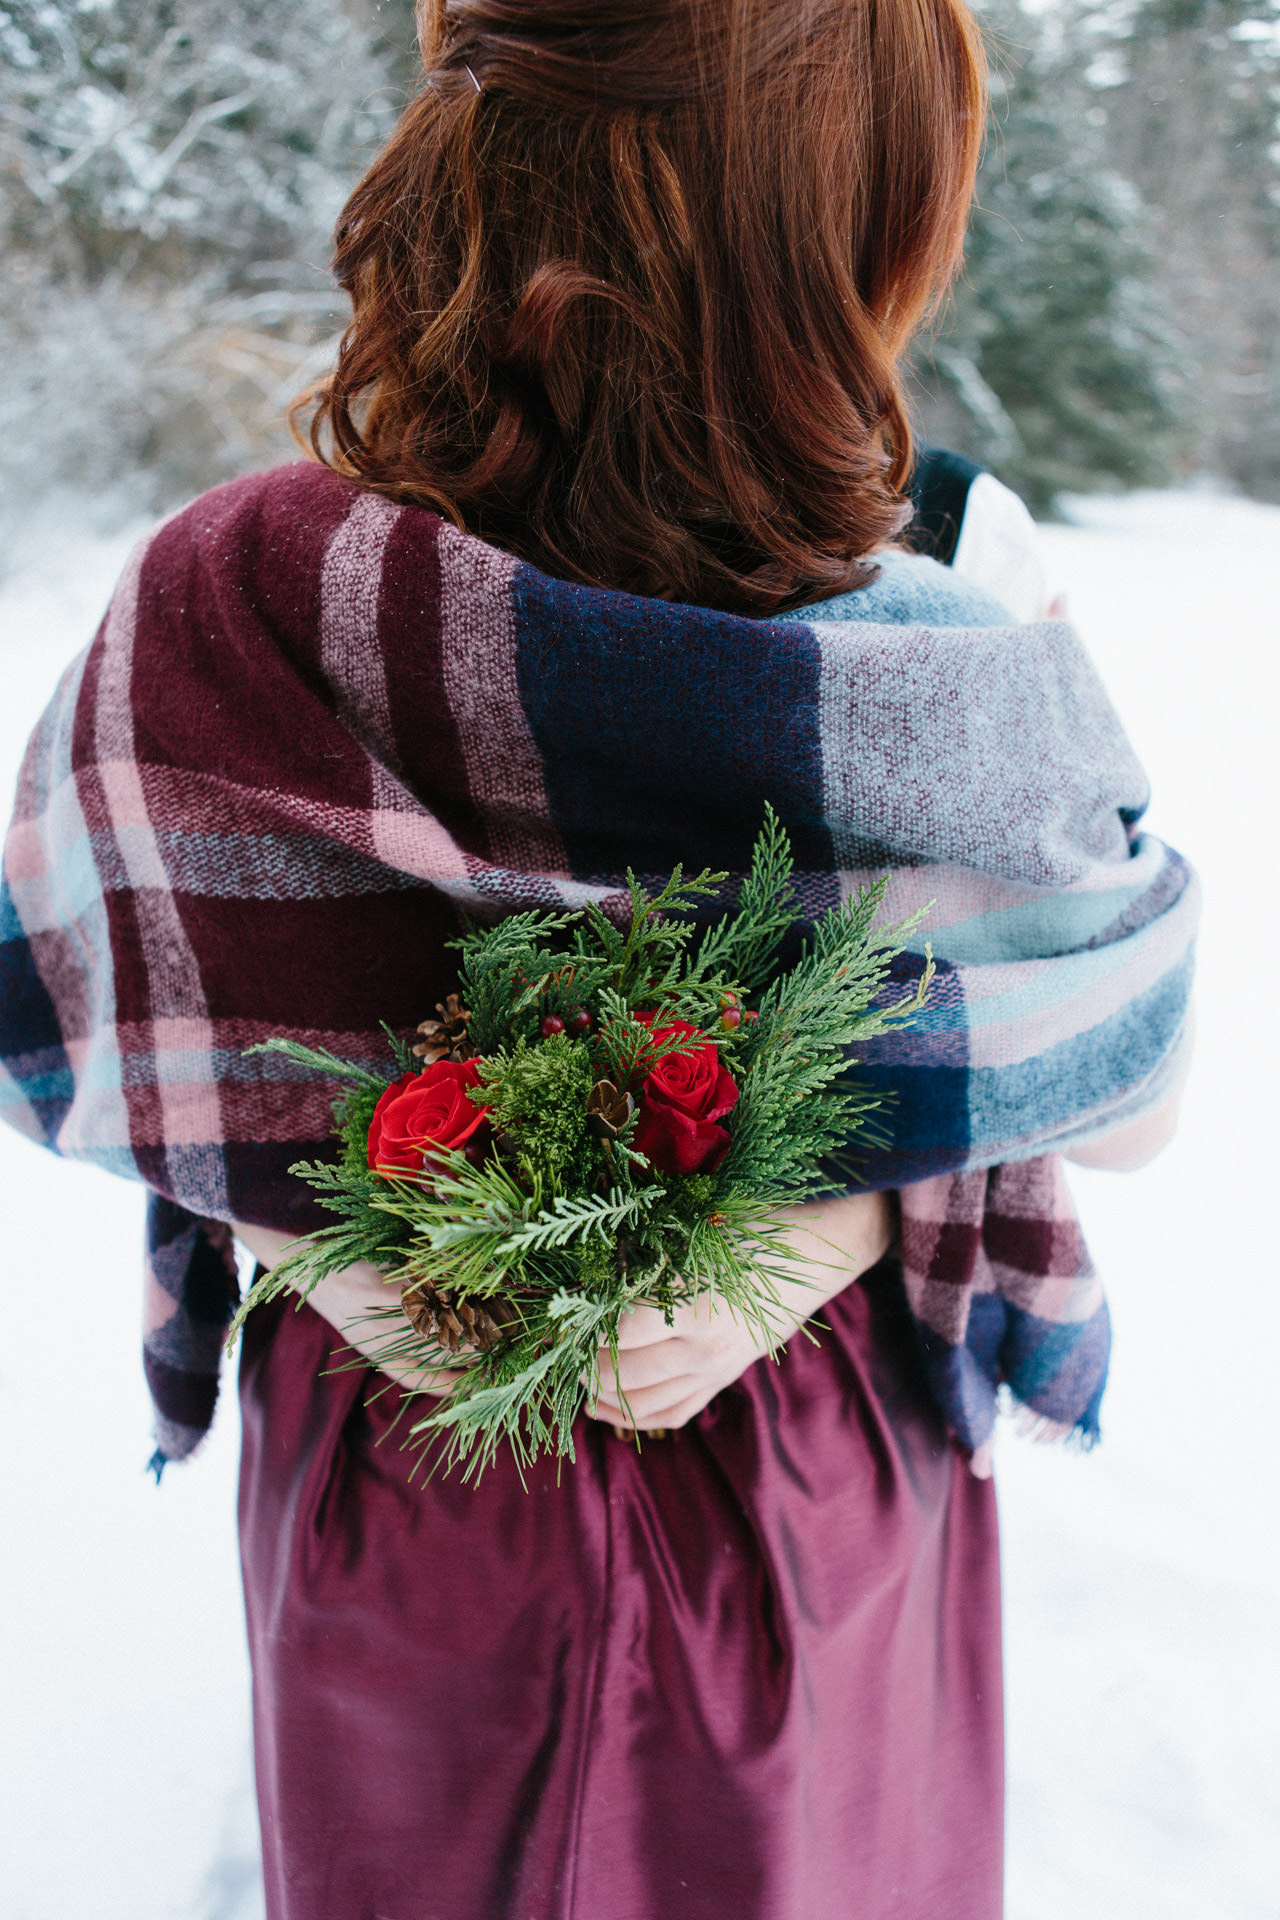 Winter wedding bouquet full of greens and red roses